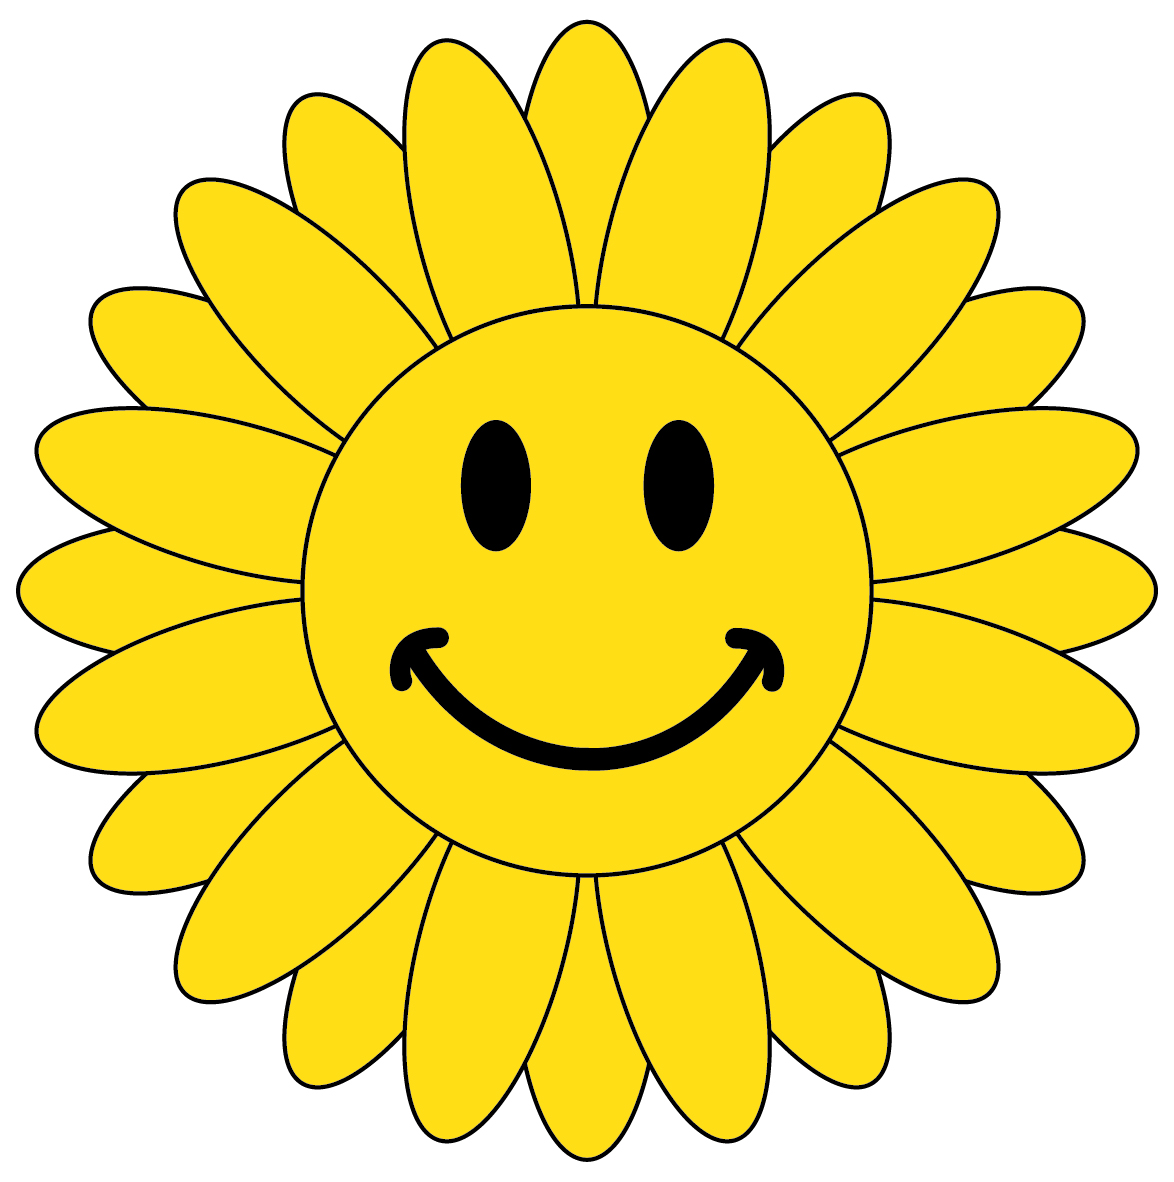 clipart yellow smiley faces - photo #28